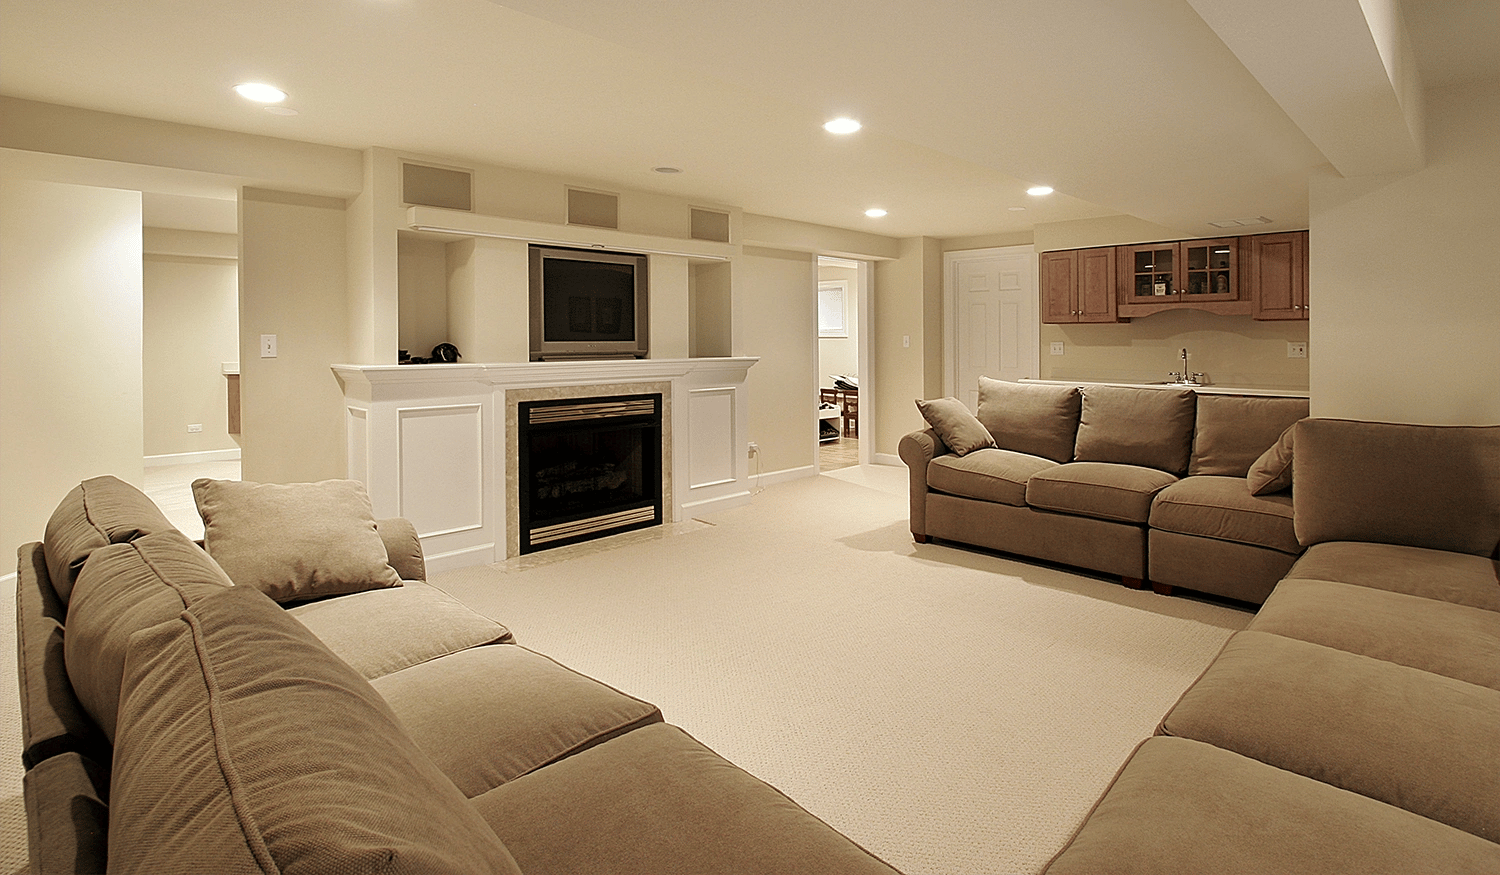 A basement remodeled as an entertainment room. Three large brown couches in front of a fireplace and television.